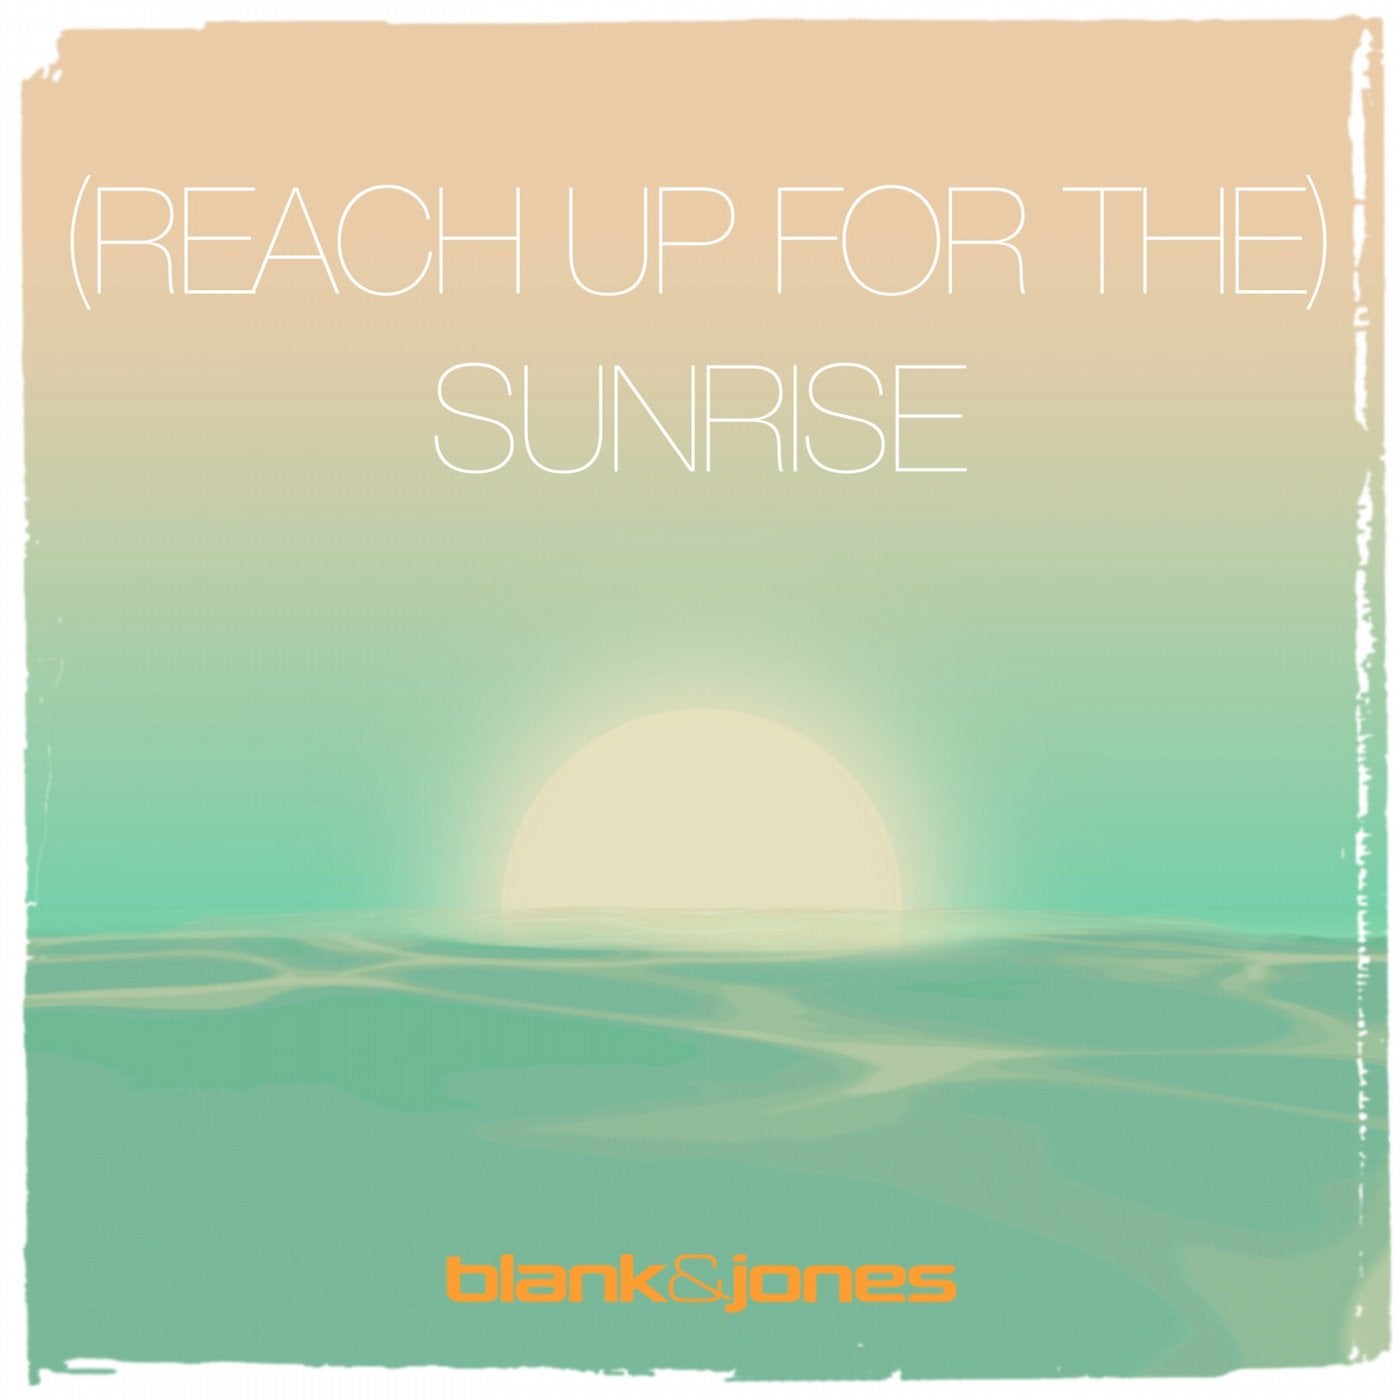 (Reach up for The) Sunrise